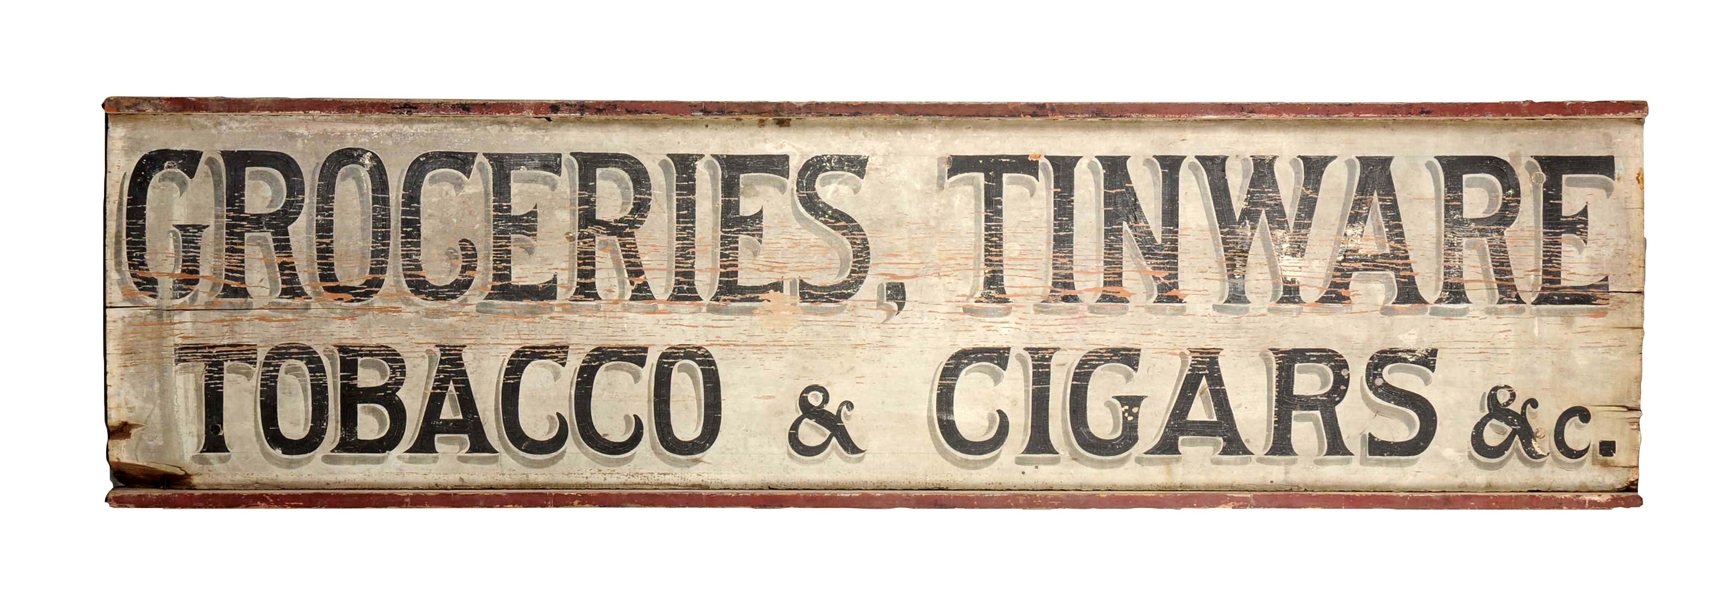 TOBACCO, CIGARS & GROCERIES ADVERTISING TRADE SIGN.